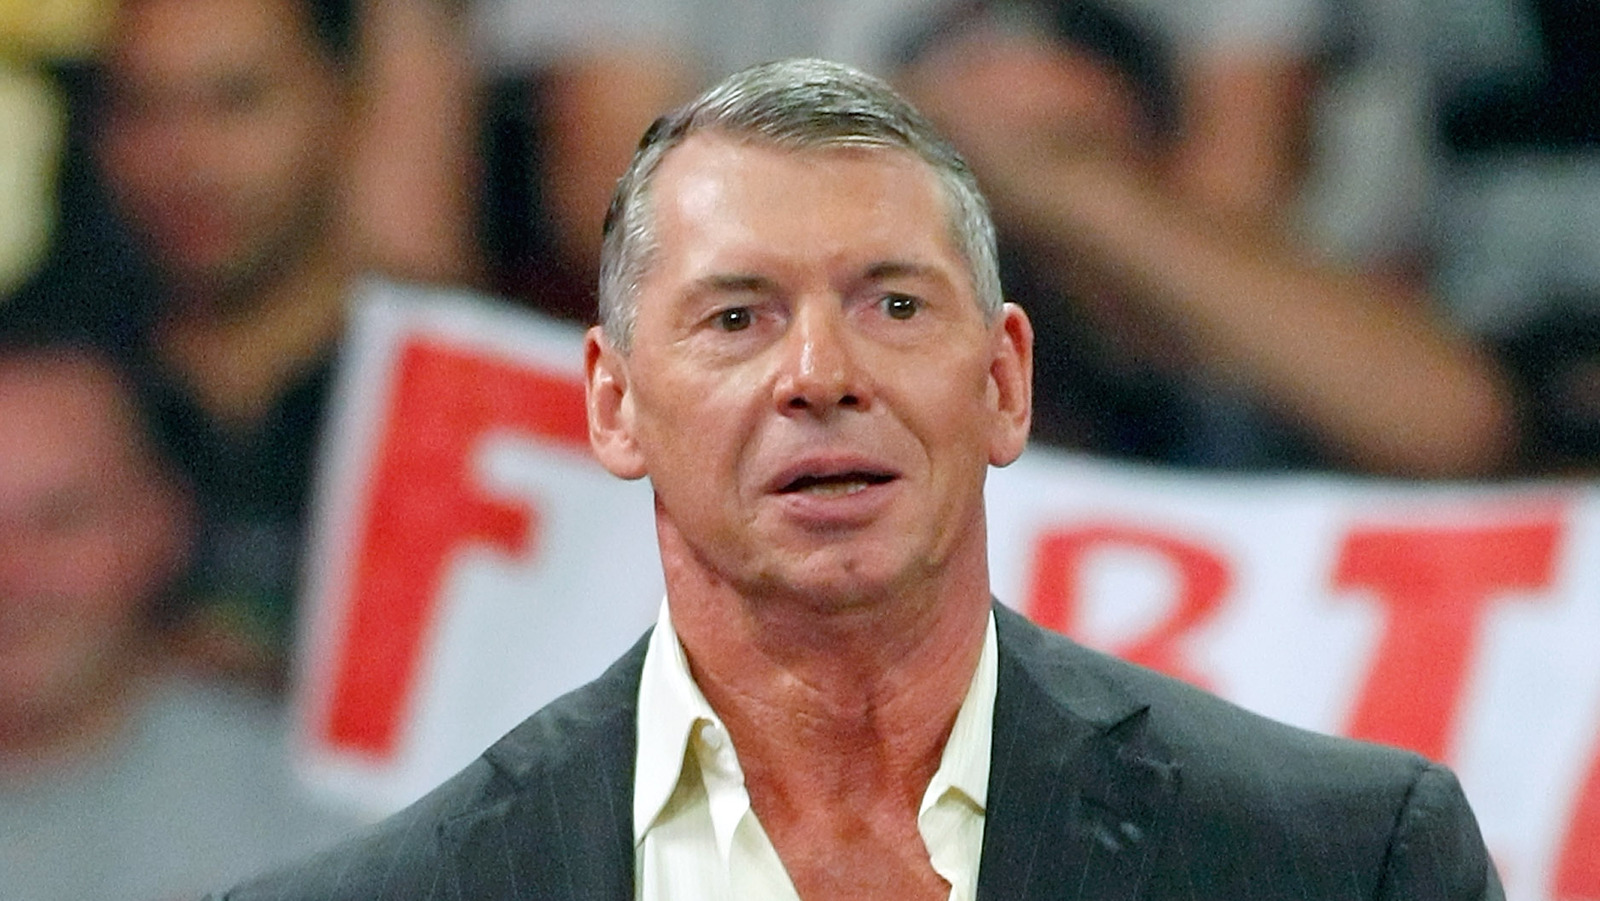 Former WWE Ring Boy To Give Interview About Vince McMahon, Pat Patterson And Others